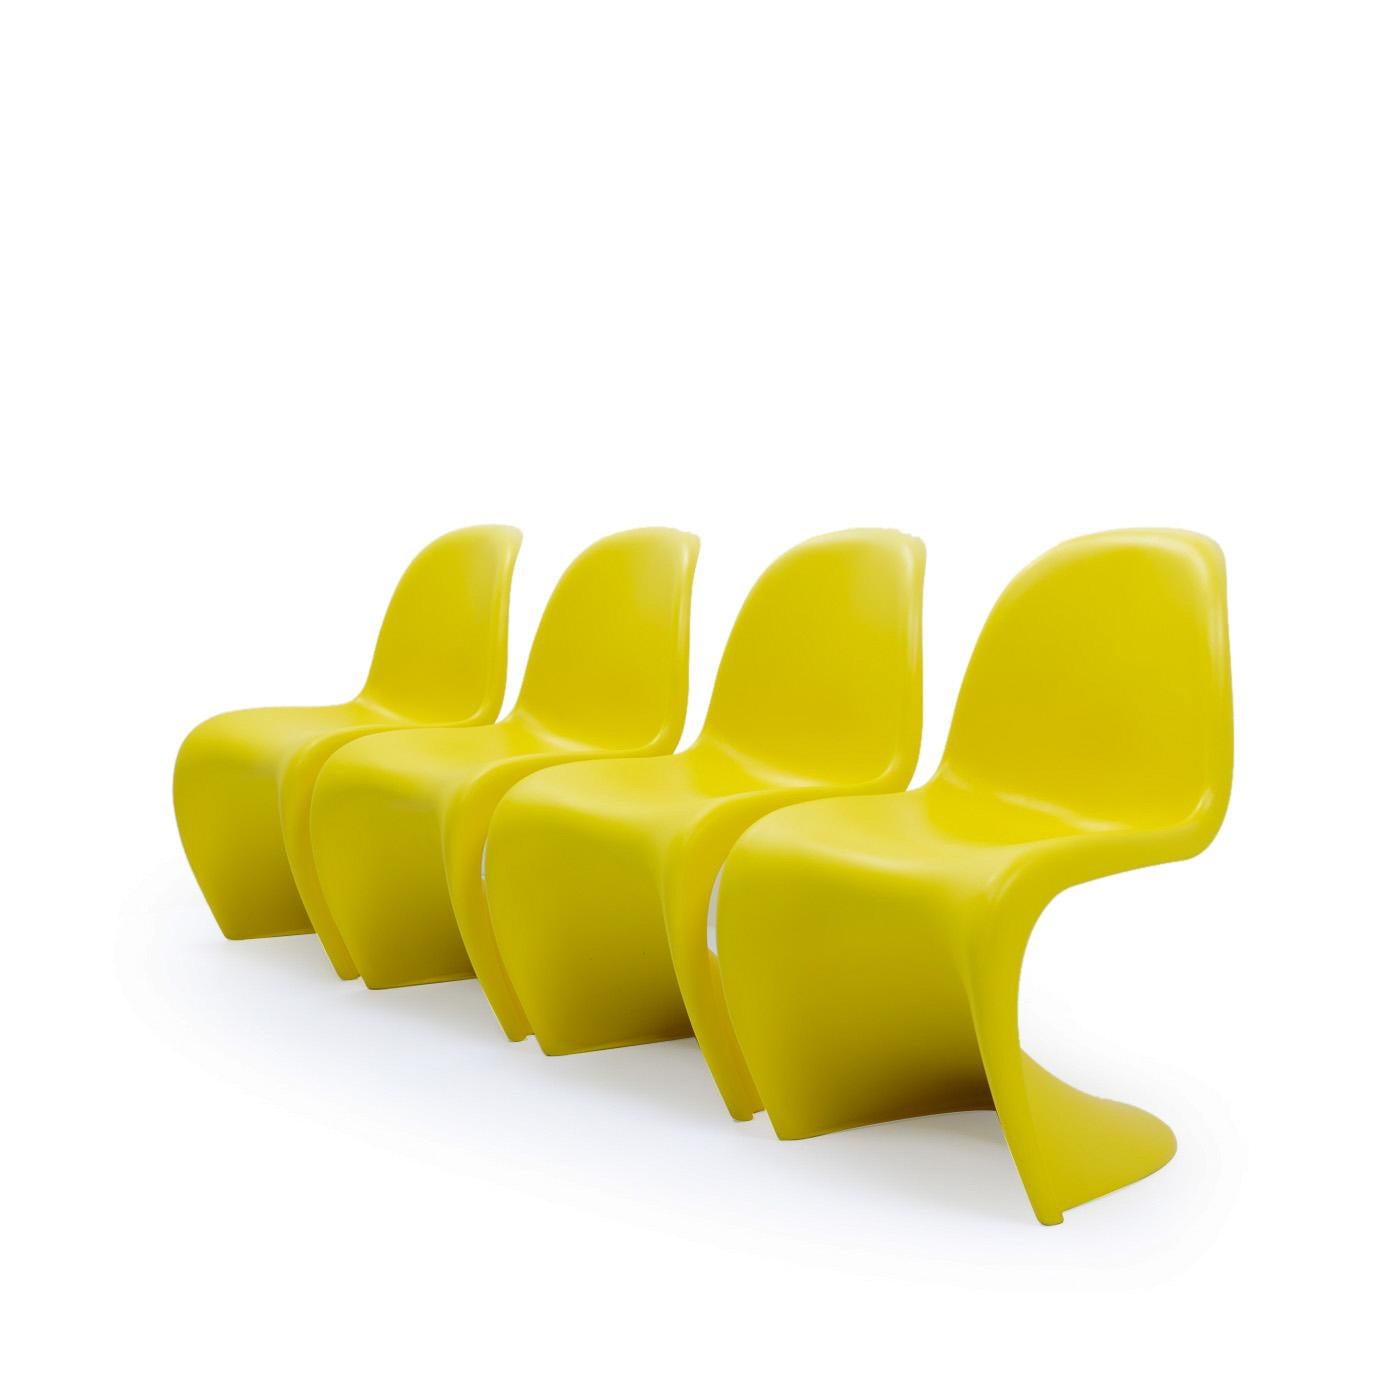 The Panton Chair, also known as Pantonstolen in Danish, is a remarkable S-shaped plastic chair crafted by the talented Danish designer Verner Panton back in the 1960s. 

As the world's first molded plastic chair, it proudly stands as a masterpiece